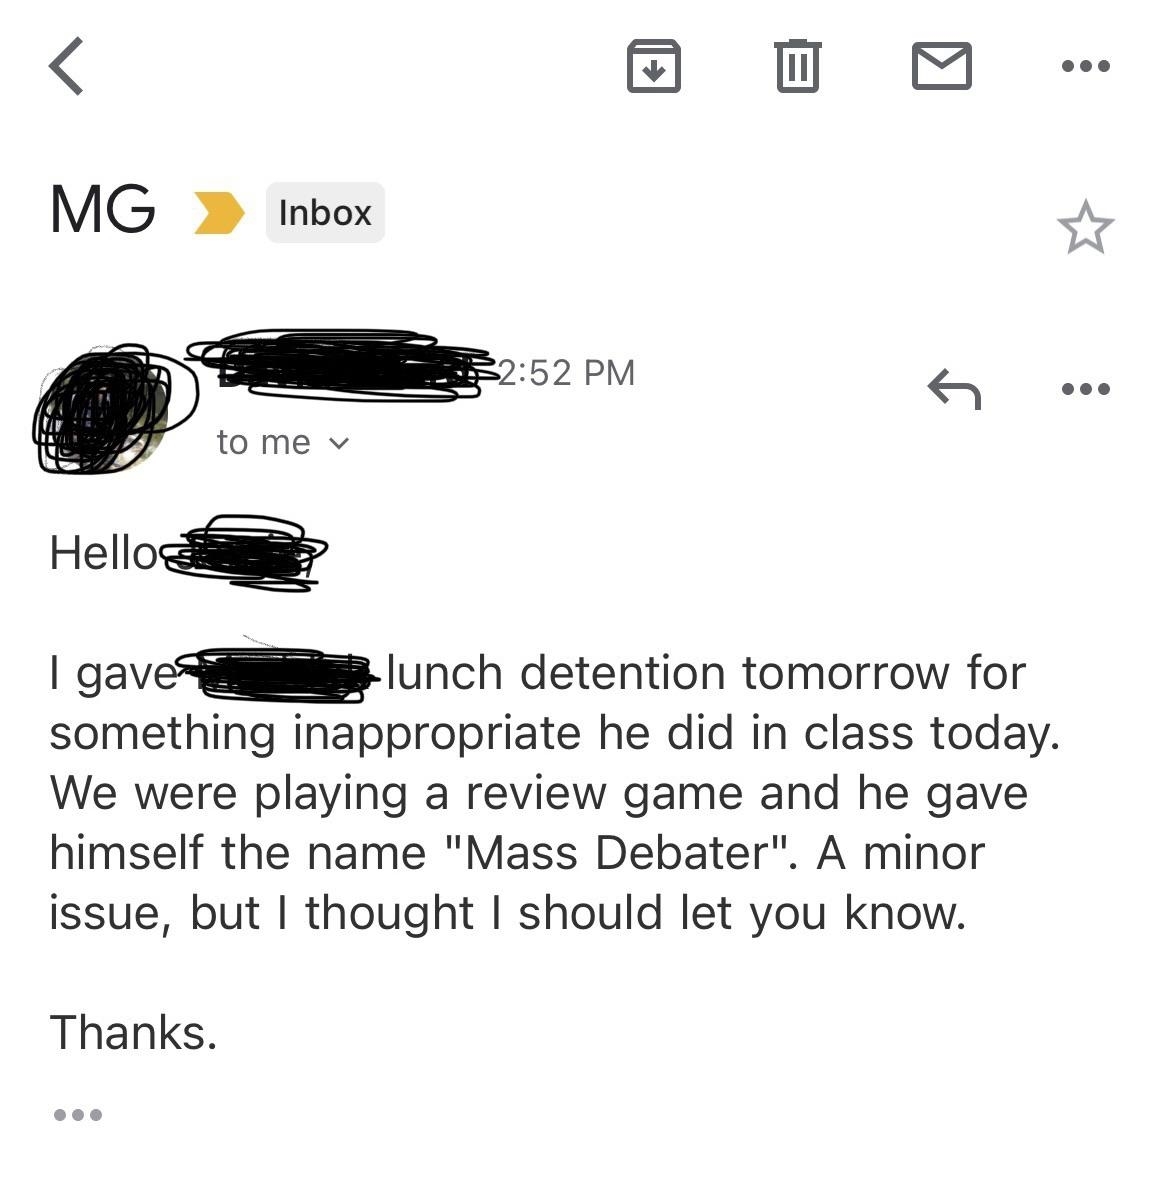 Letter from teacher to 15-year-old&#x27;s parents: &quot;I gave ___ lunch detention tomorrow for something inappropriate he did in class today; we were playing a review game and he gave himself the name &#x27;Mass Debater&#x27;; a minor issue, but I thought you should know&quot;